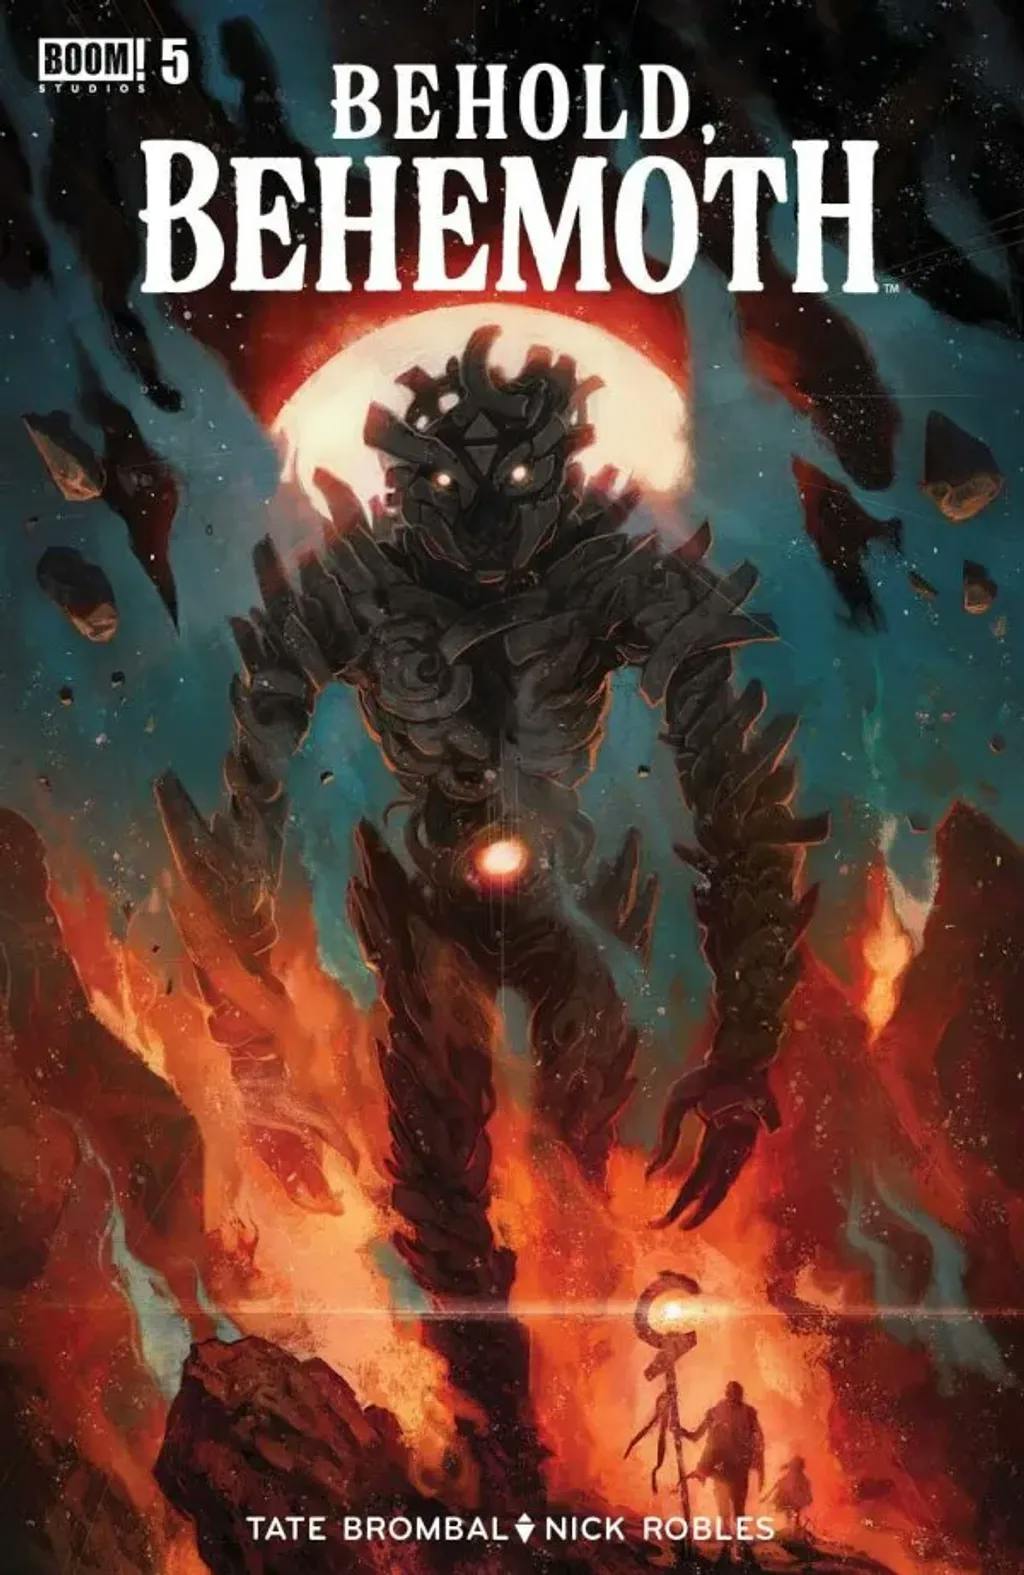 Behold, Behemoth #5 By Tate Brombal and Nick Robles